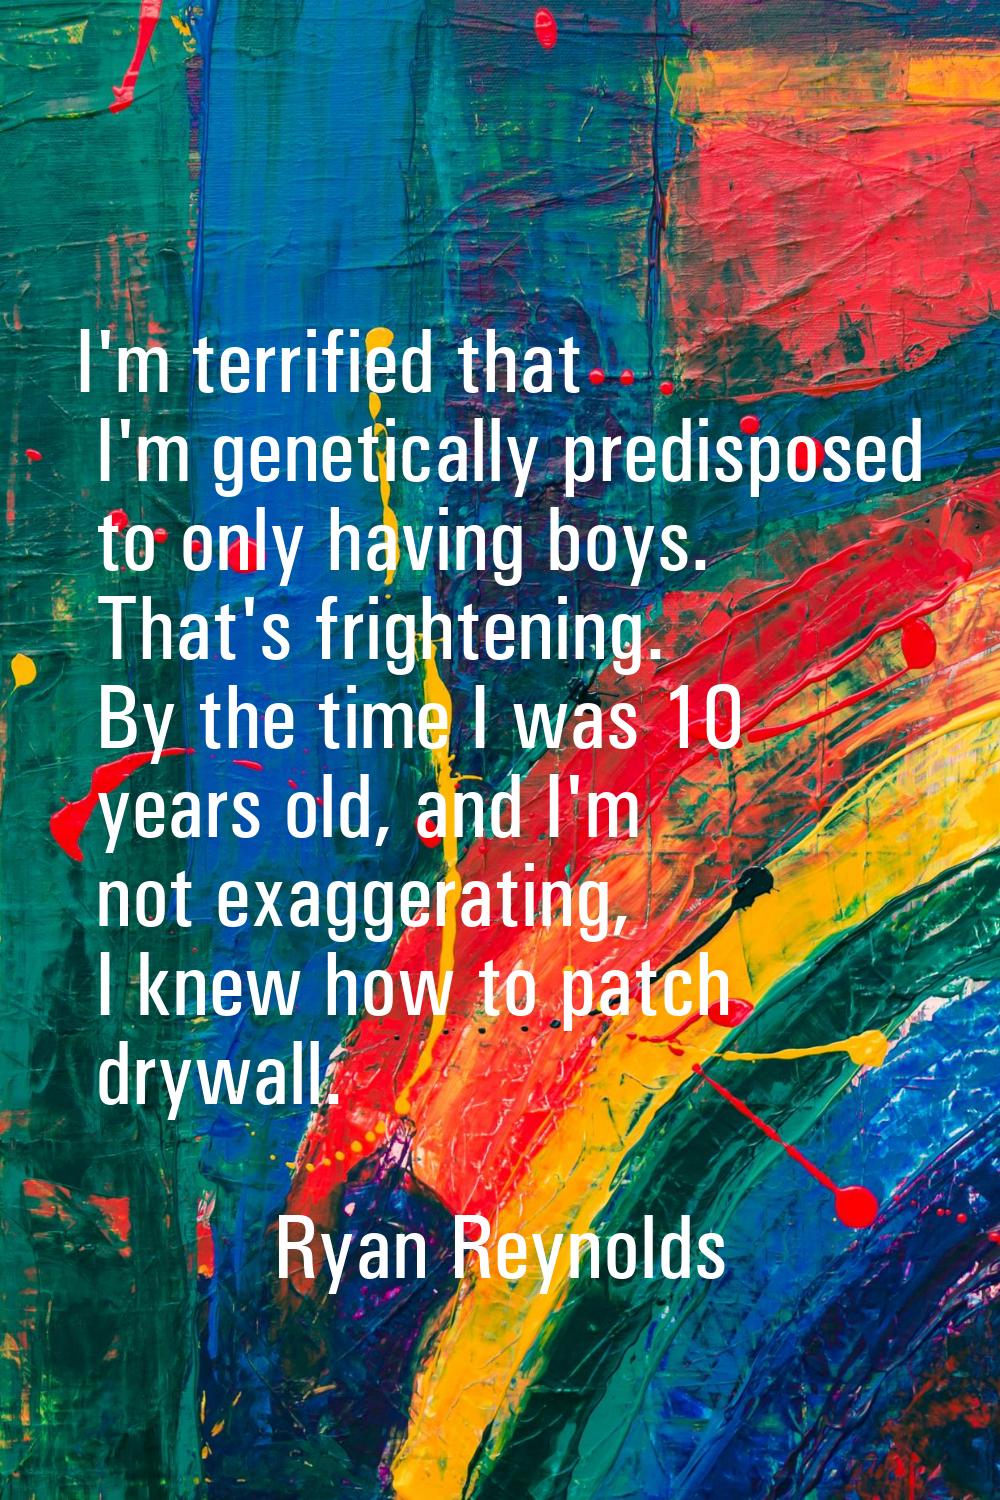 I'm terrified that I'm genetically predisposed to only having boys. That's frightening. By the time